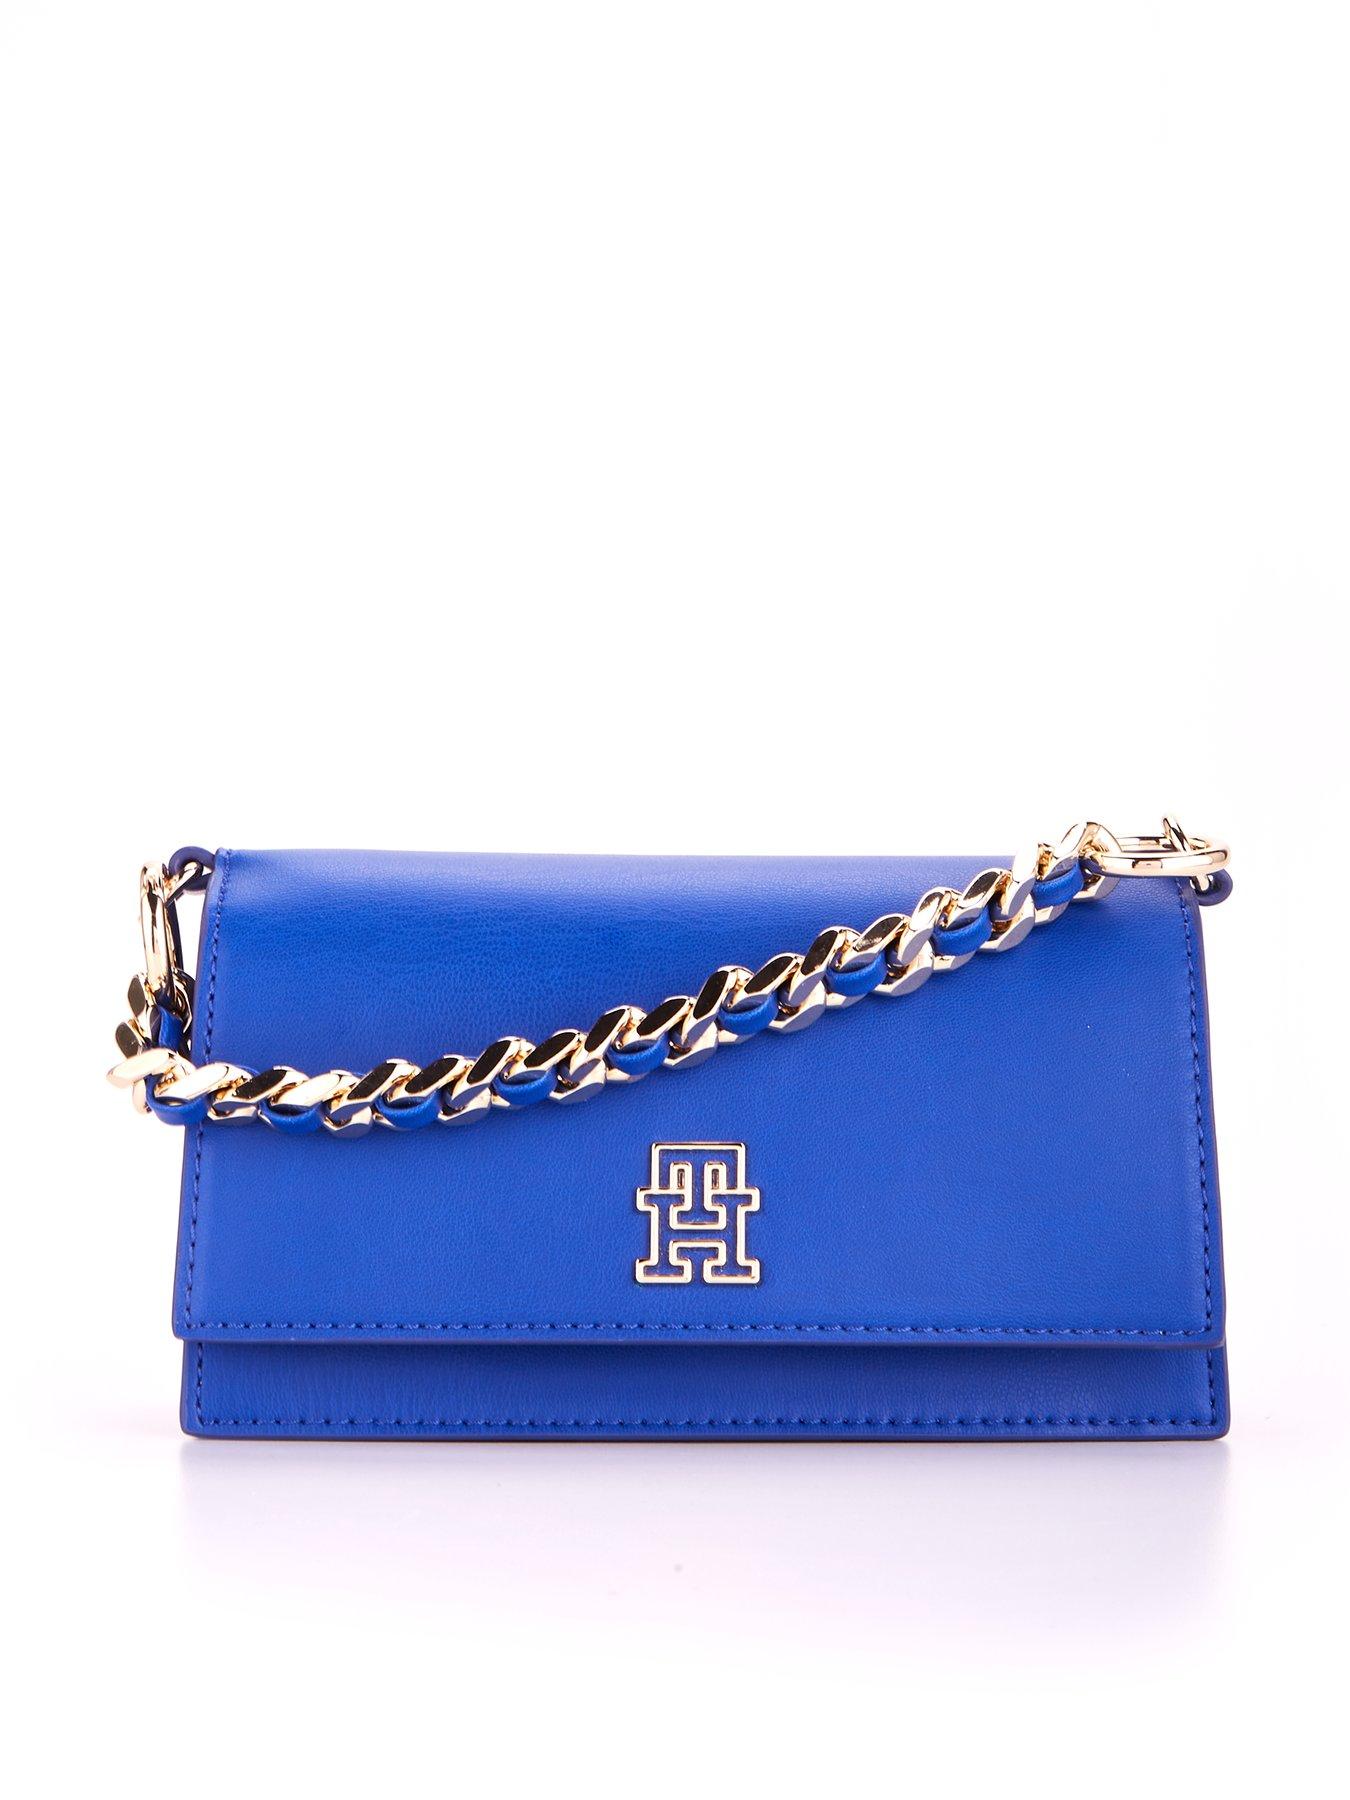 michael kors Leather royalblue Purse With Gold Chain Straps Satin